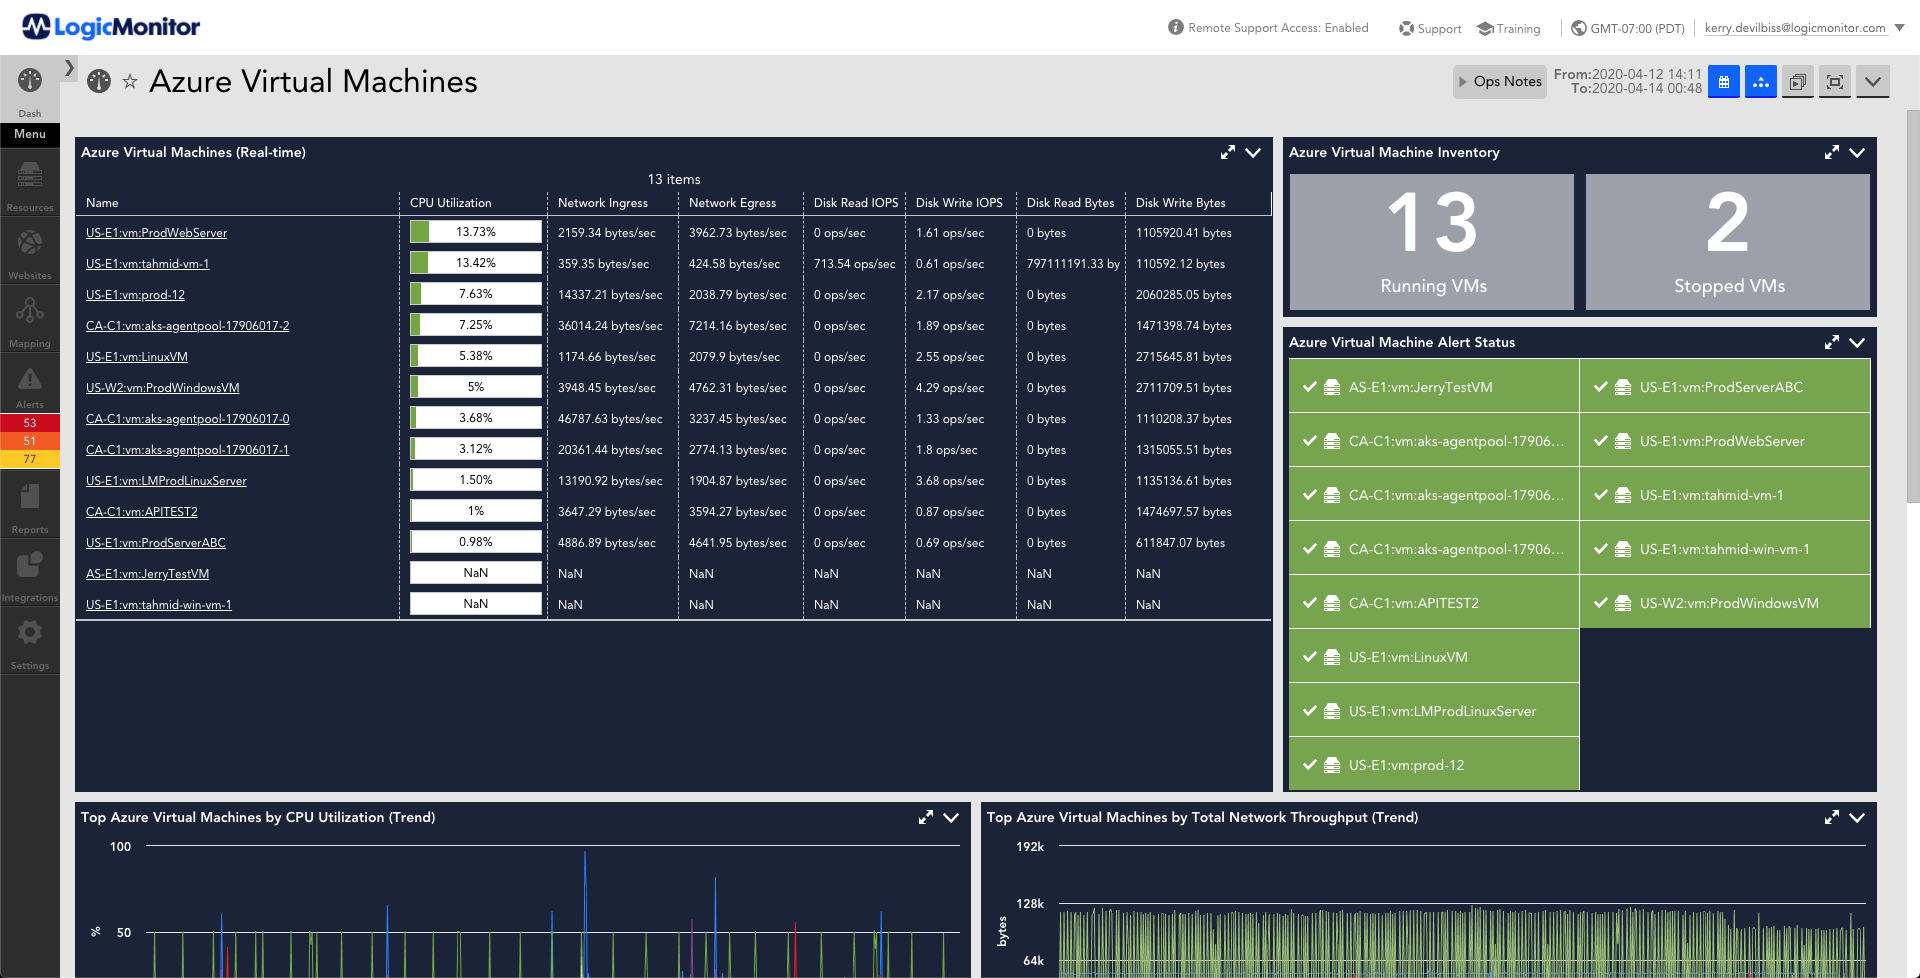 This dashboard provides an a listing of various metrics that are monitored for Azure Virtual Machines. The metrics displayed are virtual machine statistics, running and stopped count, status, CPU over time, network throughput over time